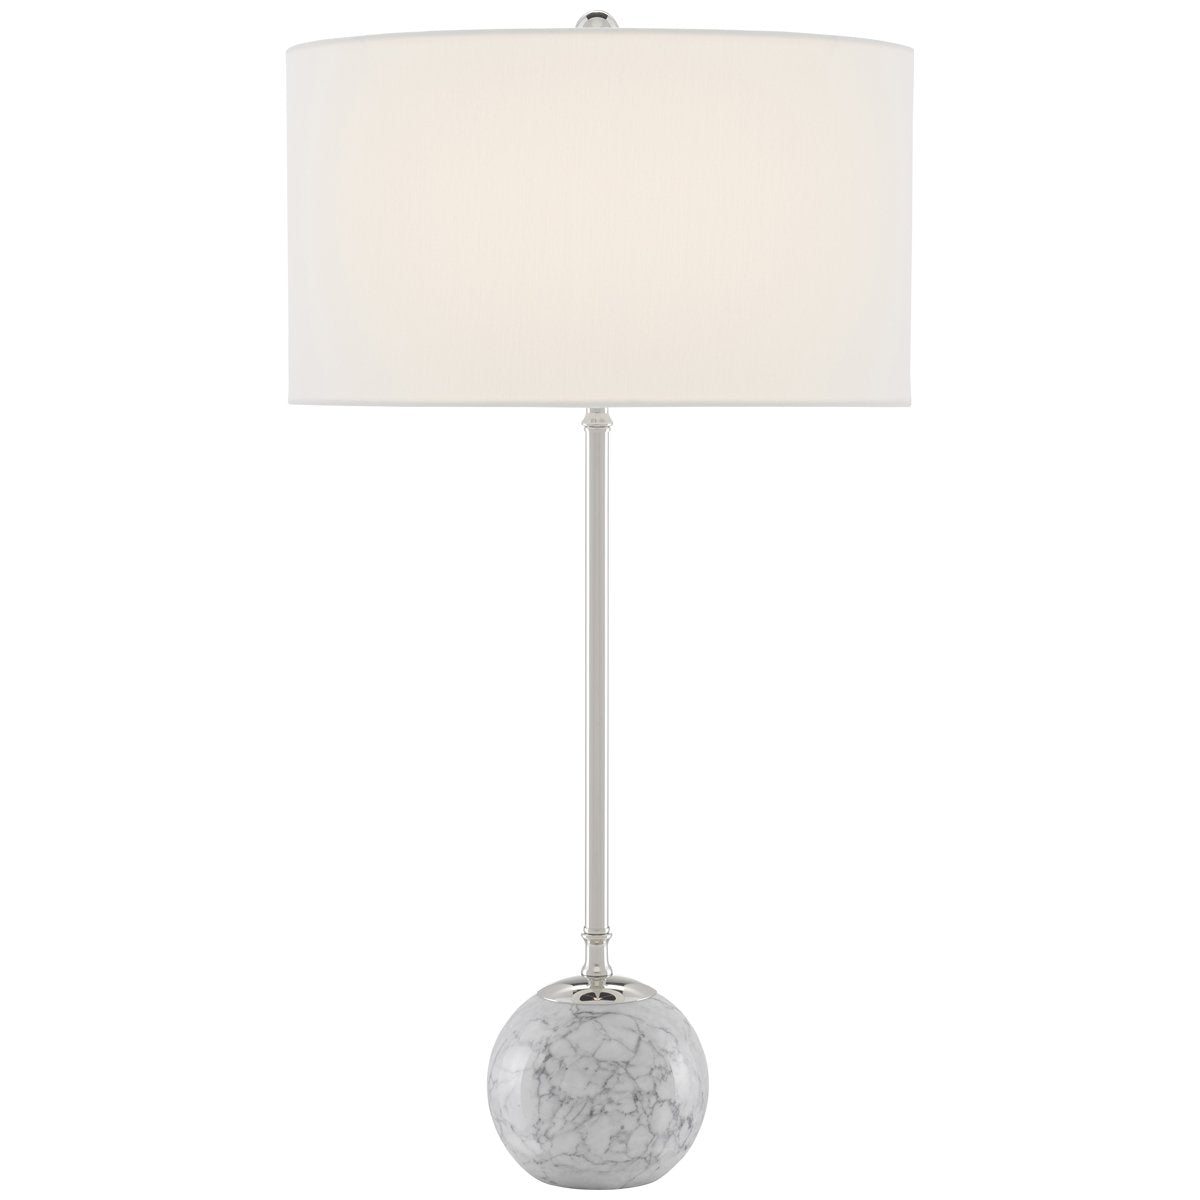 Currey and Company Villette Table Lamp